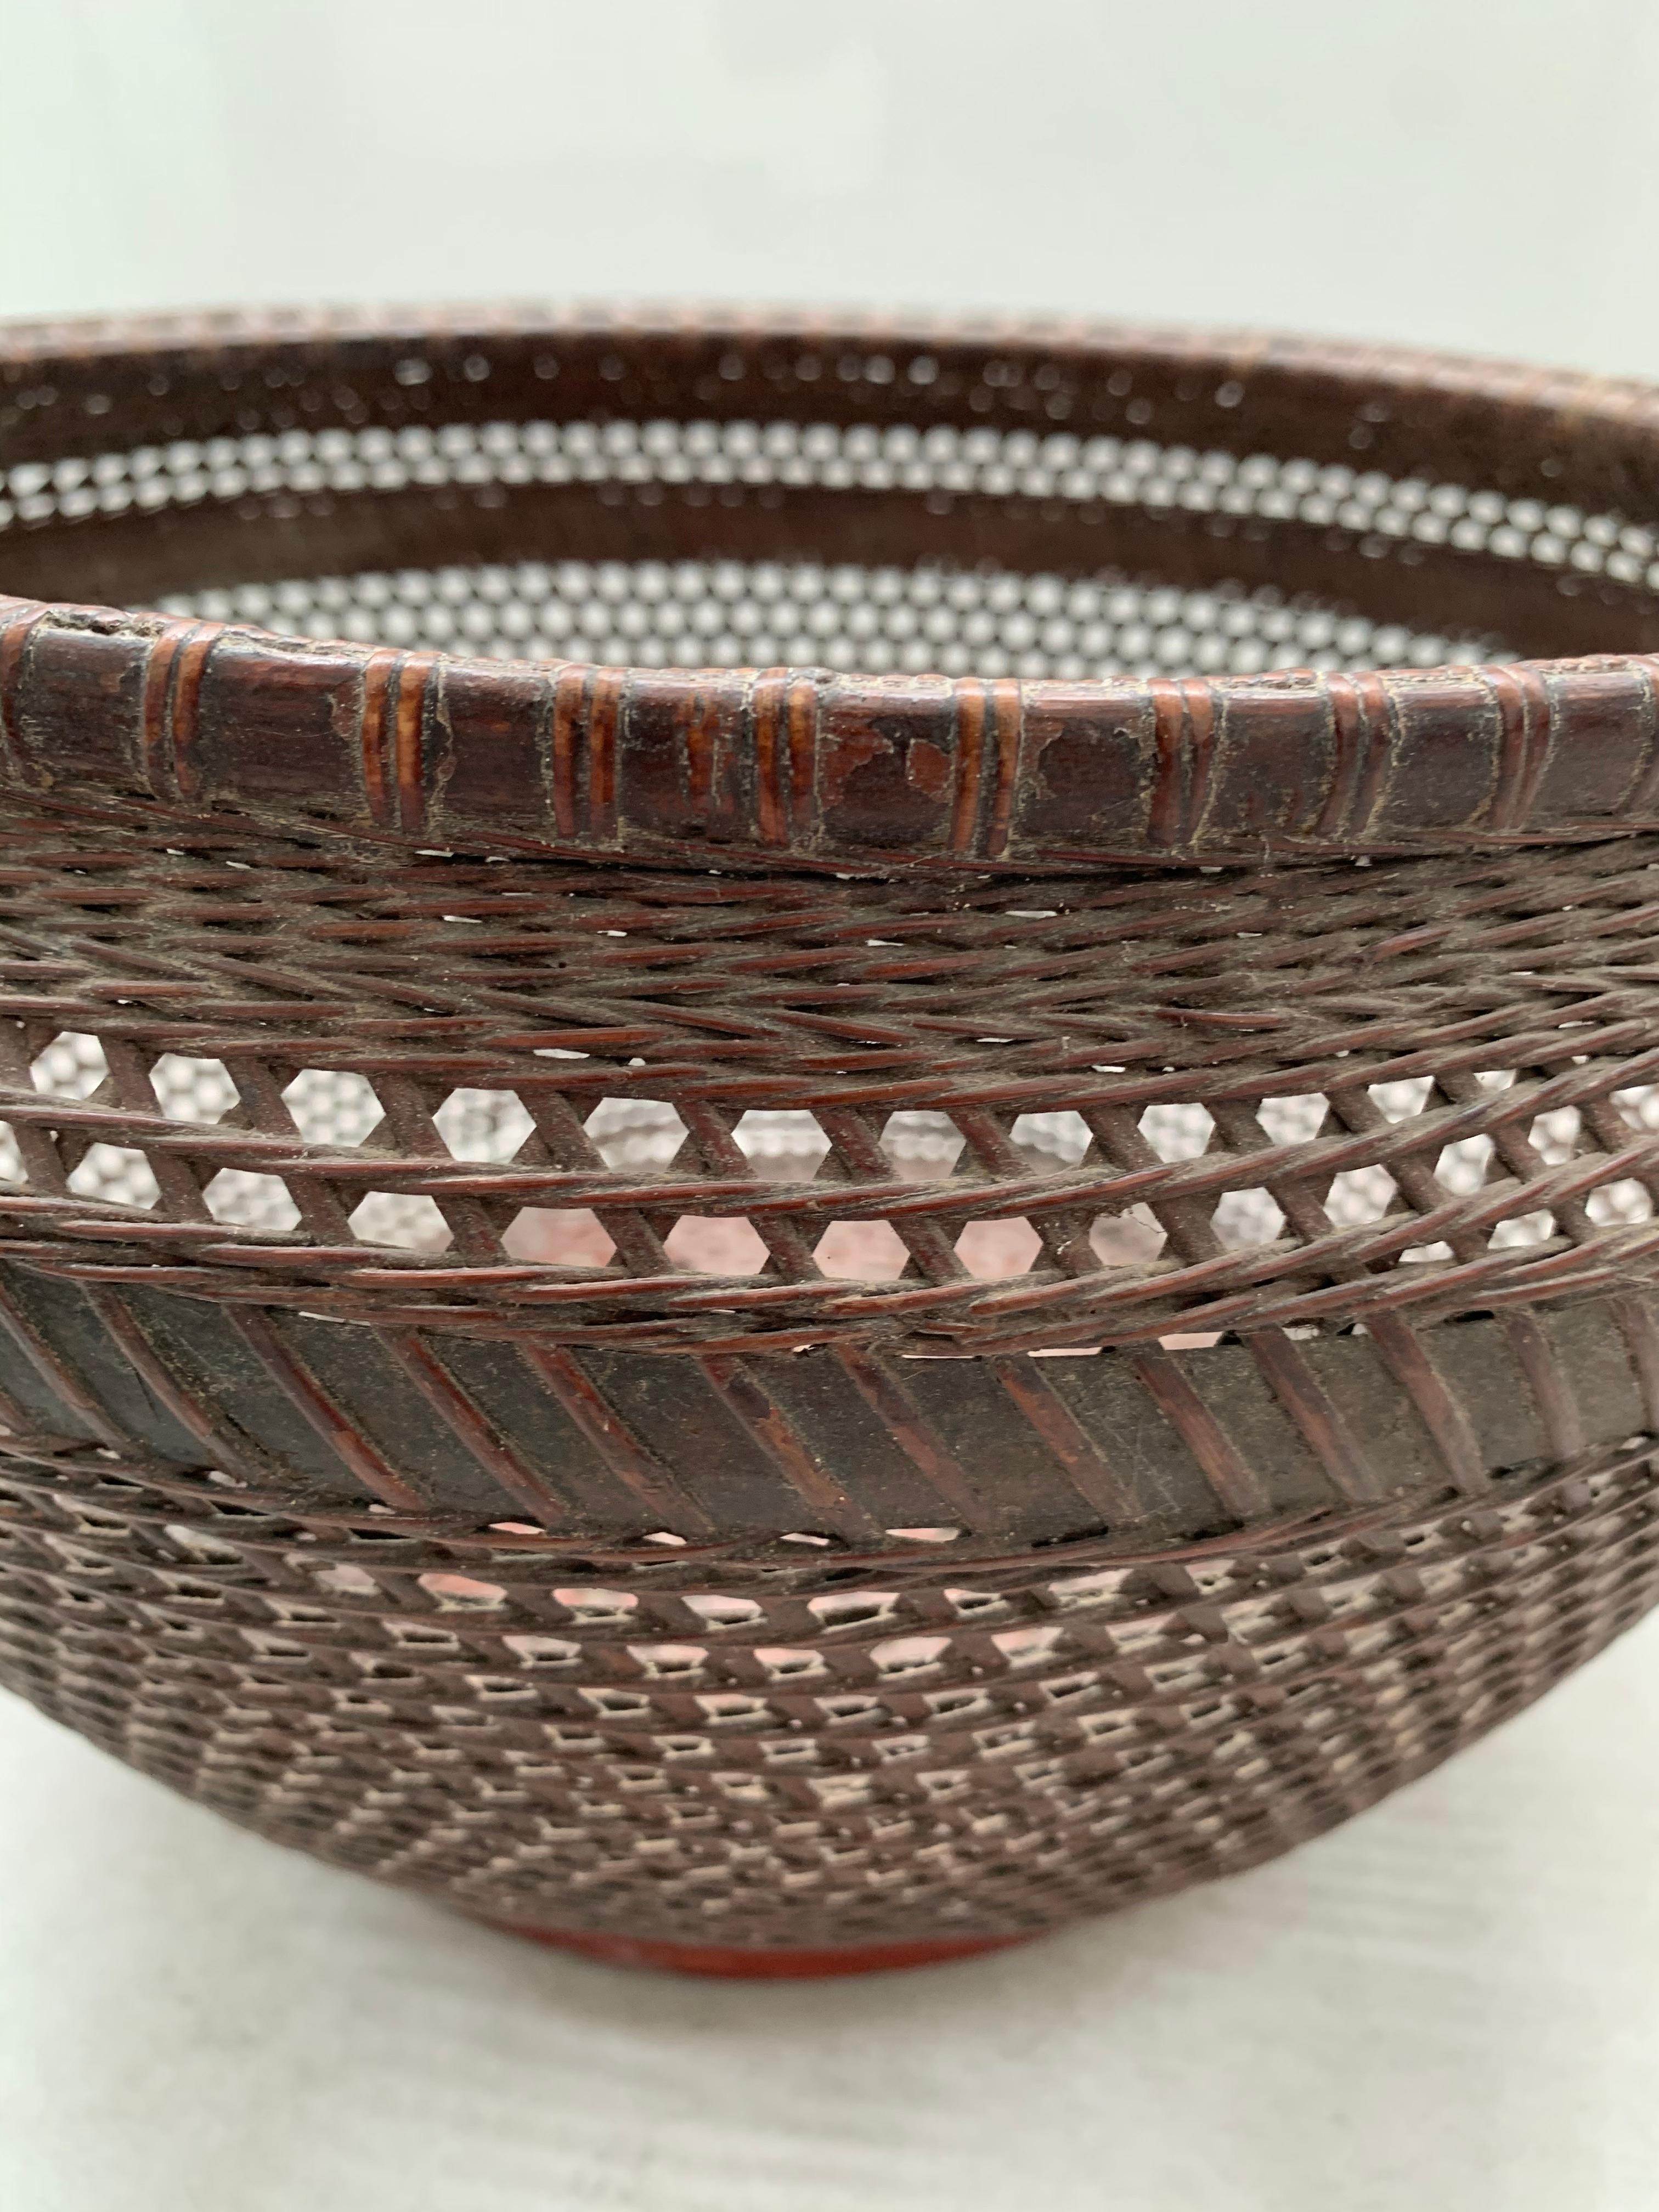 Chinese Basket Pair Hand-Woven Rattan with Red Wood Base, Early 20th Century For Sale 2